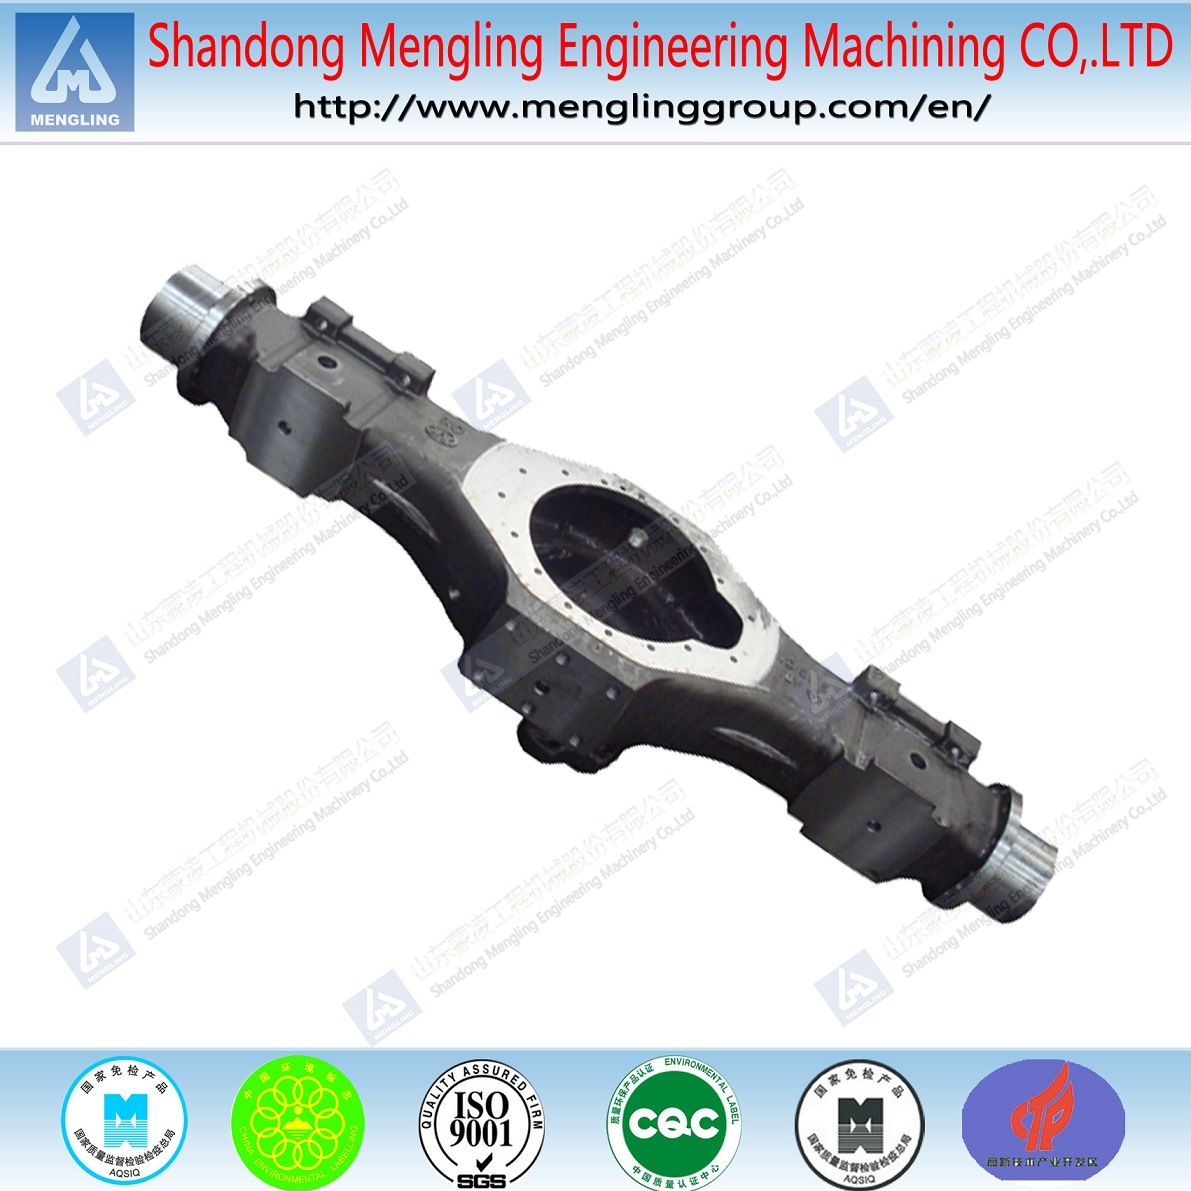 OEM Sand and CNC Casting Iron Parts